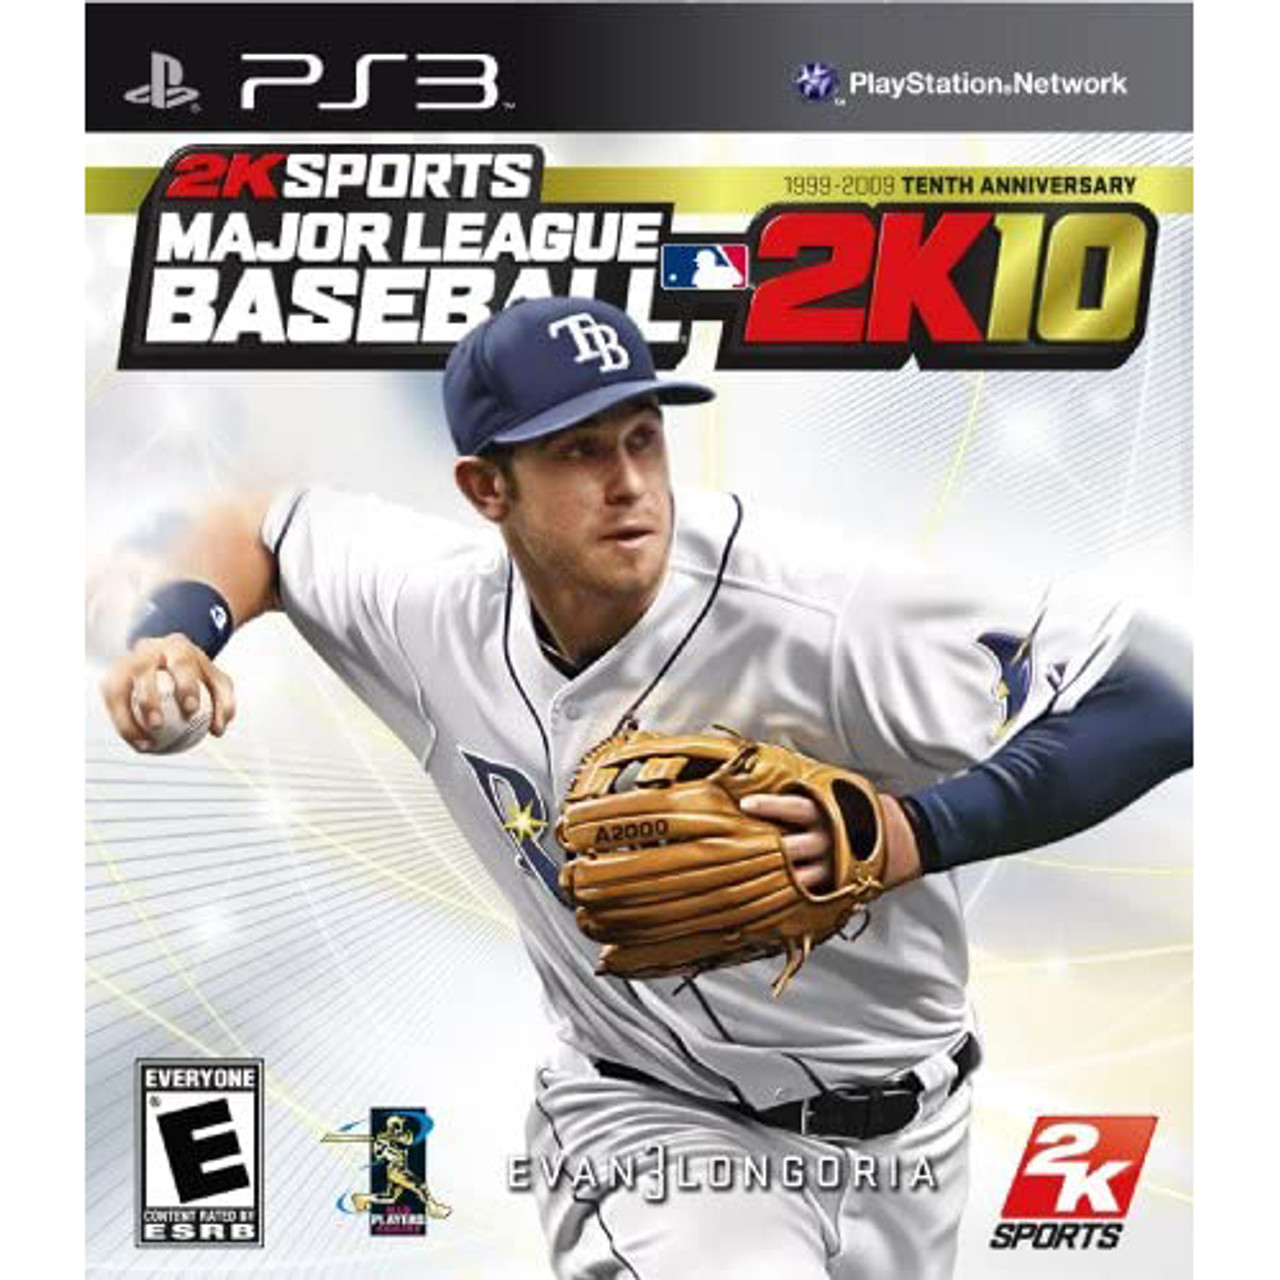 Major League Baseball 2K10 PS3 Game For Sale DKOldies